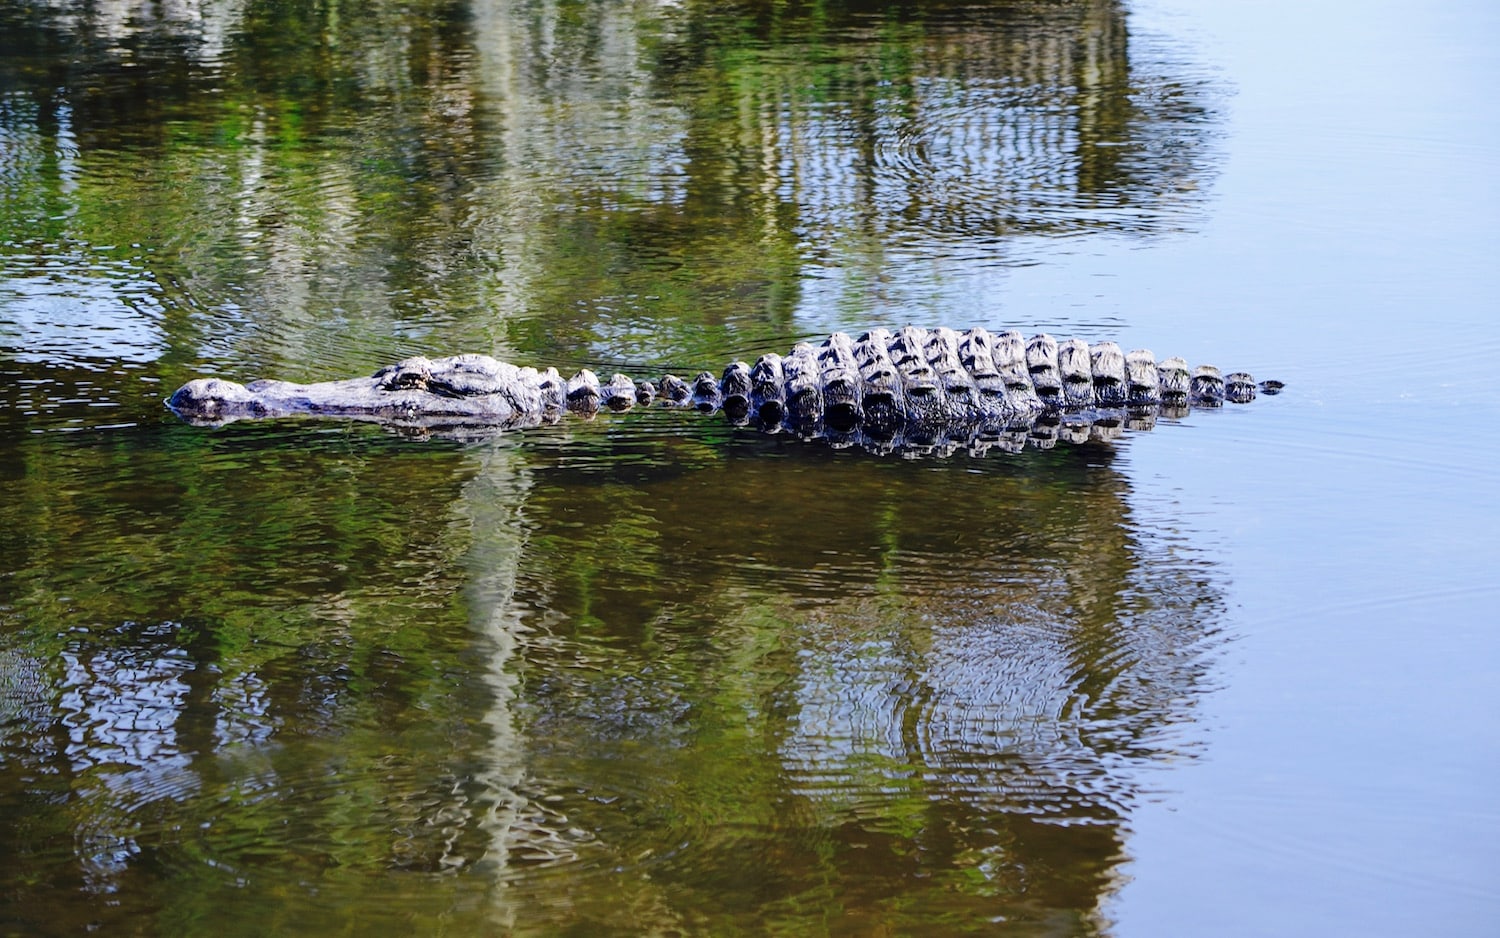 Top 5 New (and old) Things To Do at Gatorland